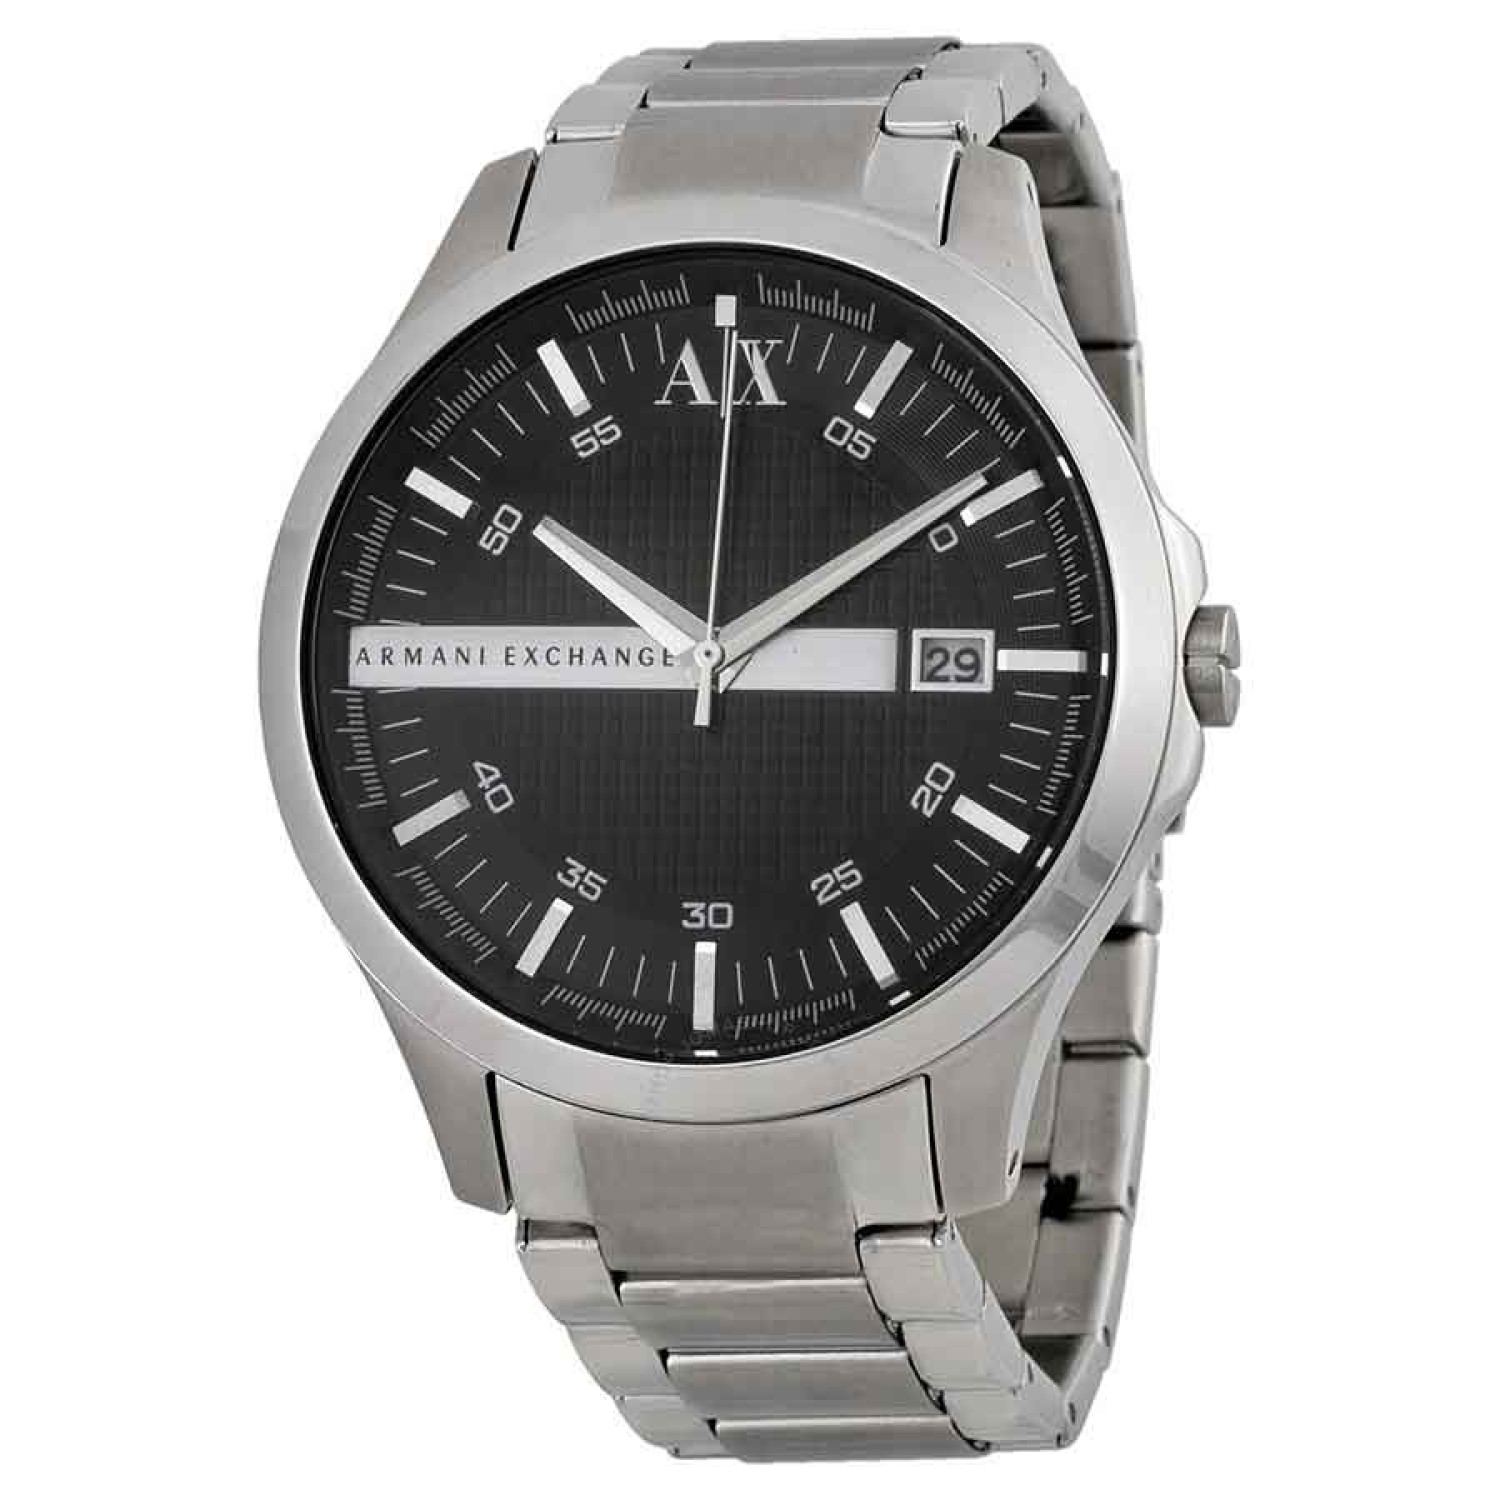 AX2103 A|X  Armani Exchange Watch. The stylish AX2103  mens Armani Exchange watch in stainless steel features a 47mm case and centred on a black dial with silver baton hour markers and date function. The watch is fitted with quartz movement and emporio ar